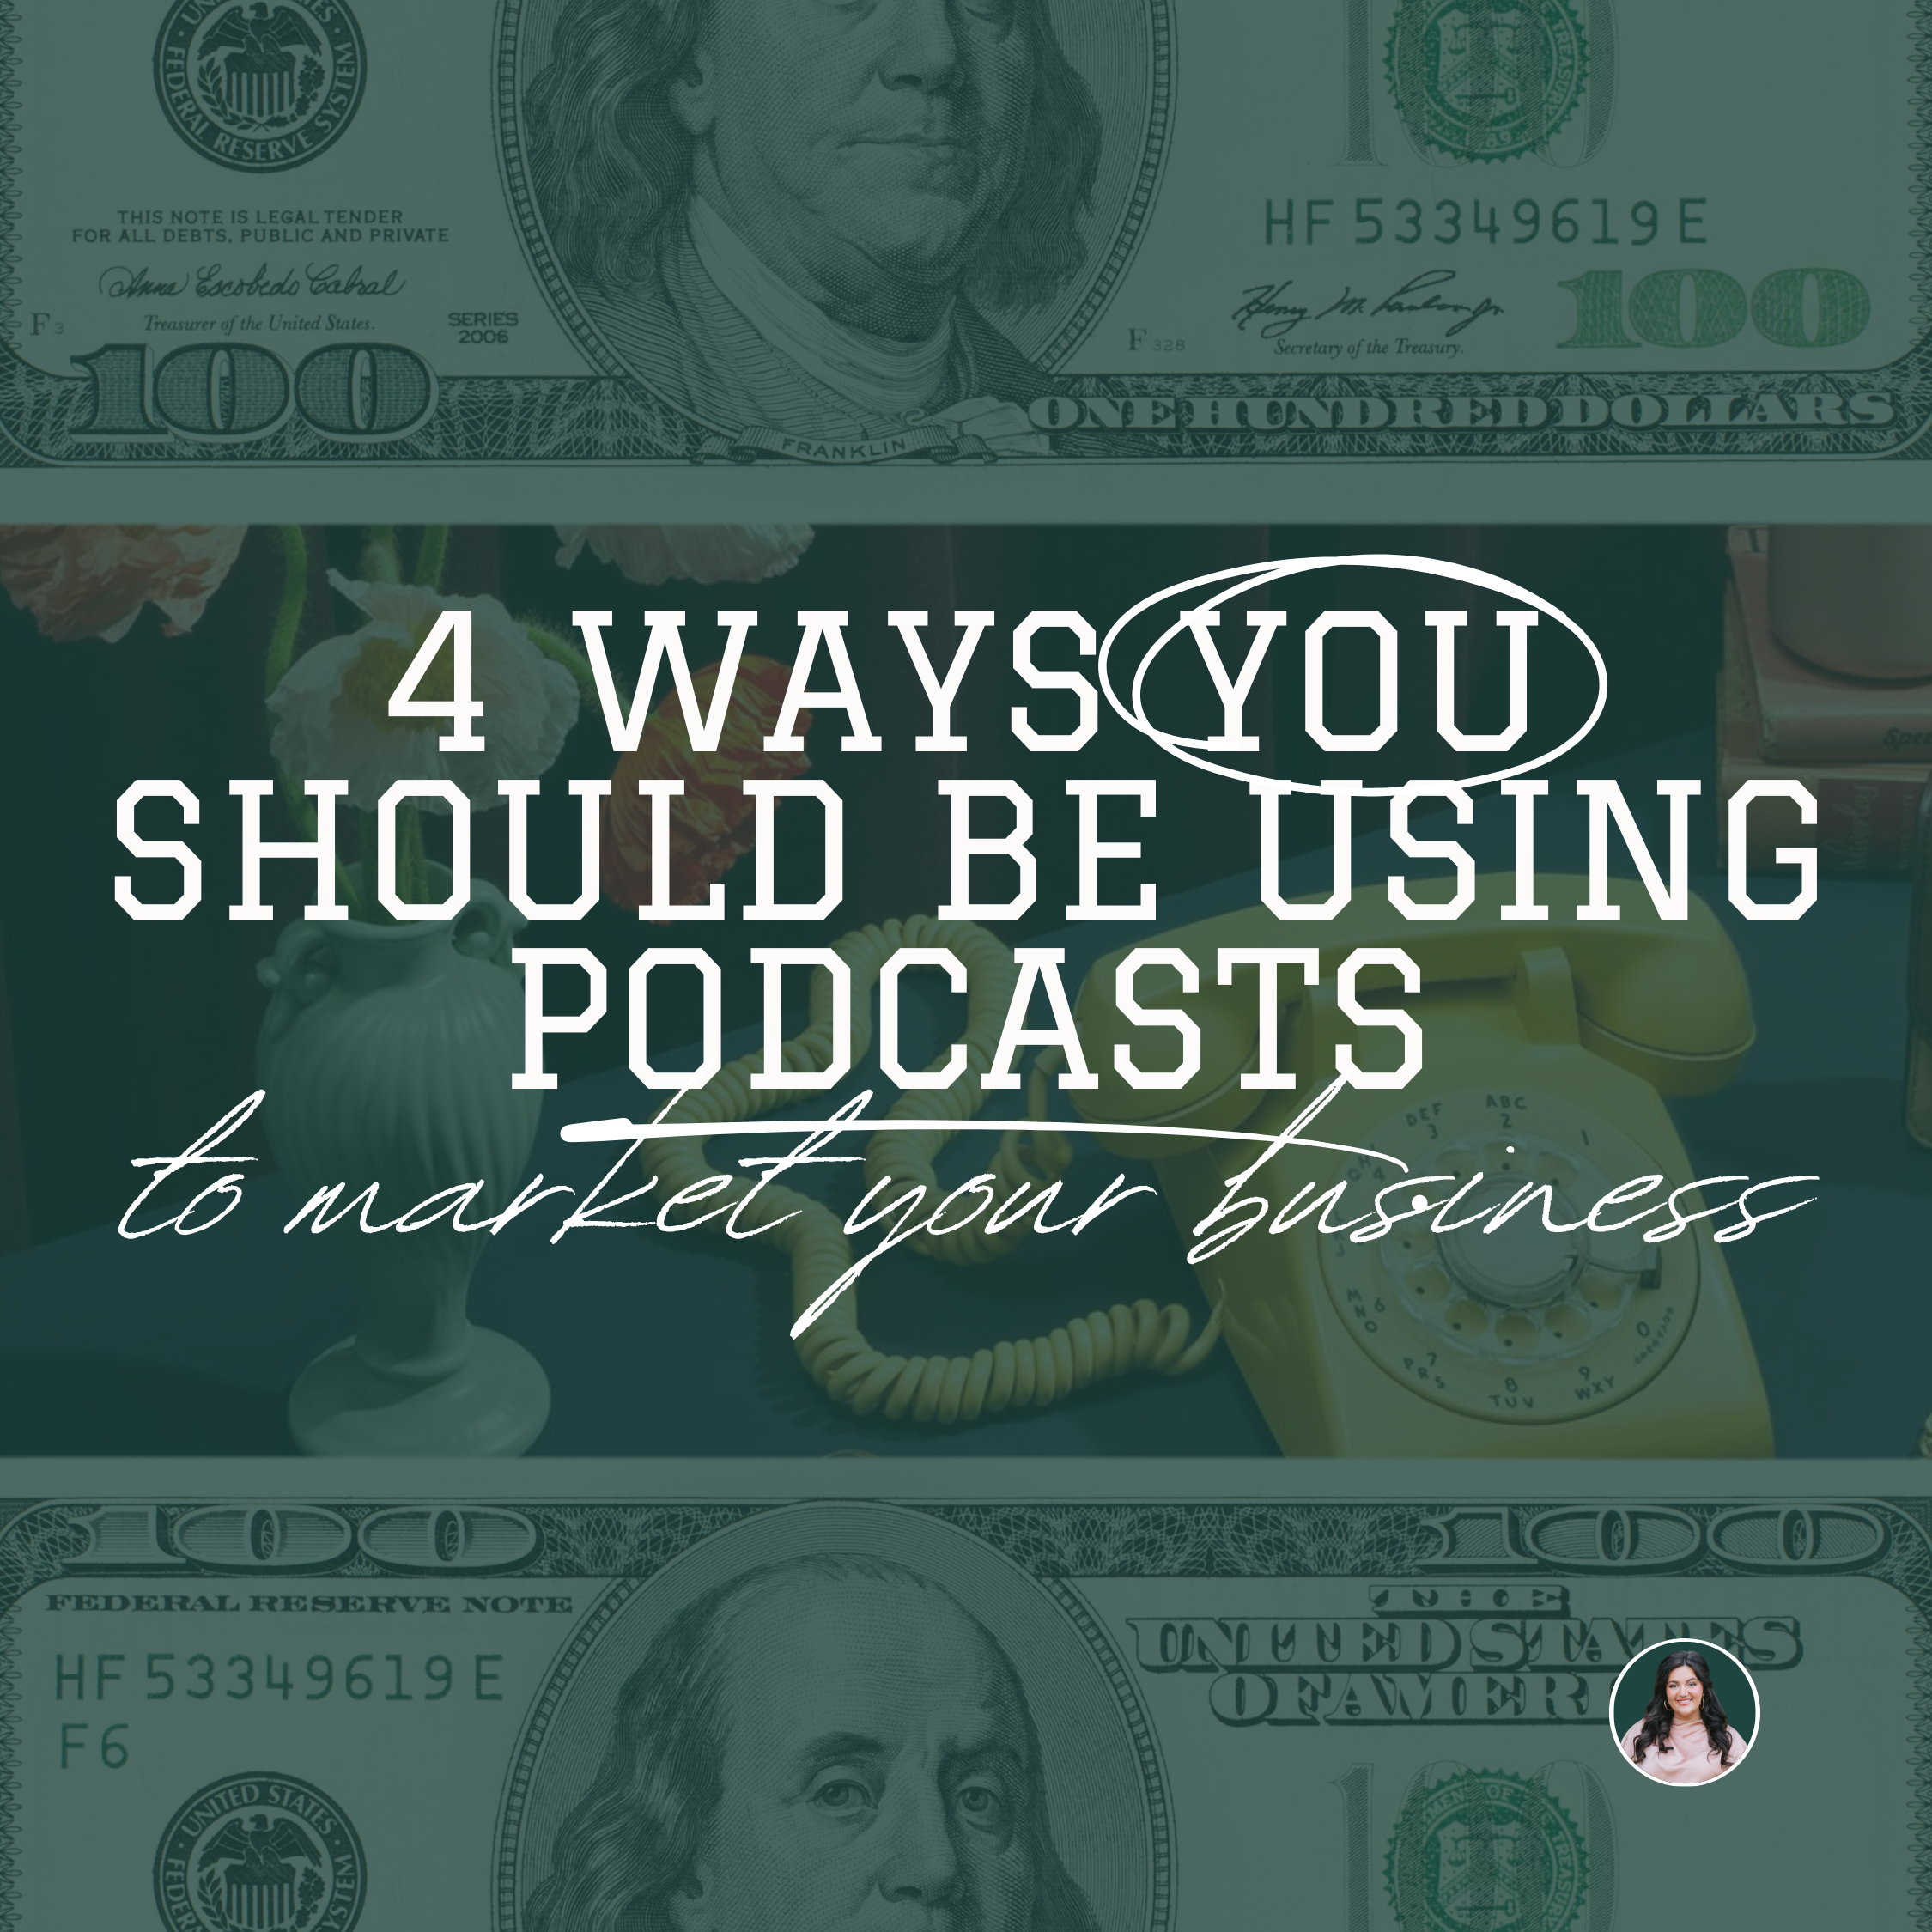 Use Podcasting in Your Marketing